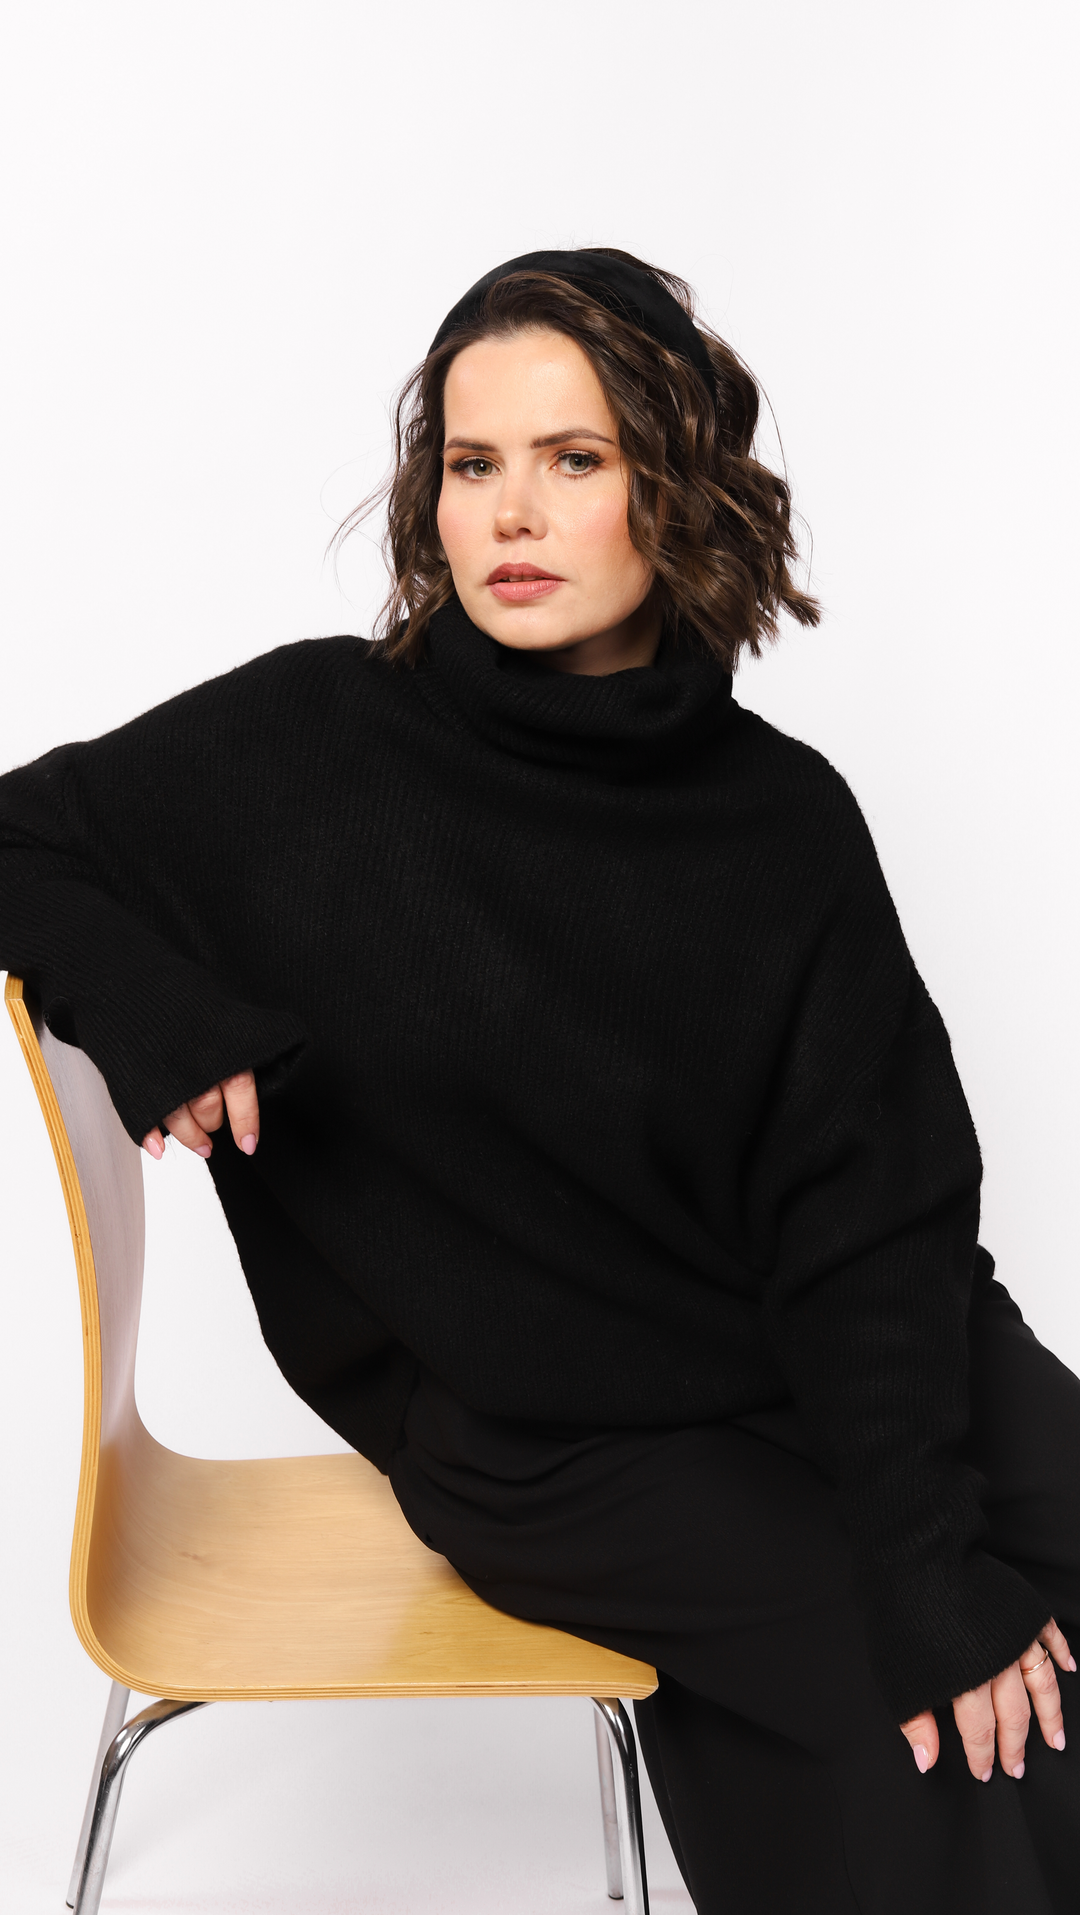 Oversized turtleneck sweater "Black" BeaA - Be At Home with Yourself